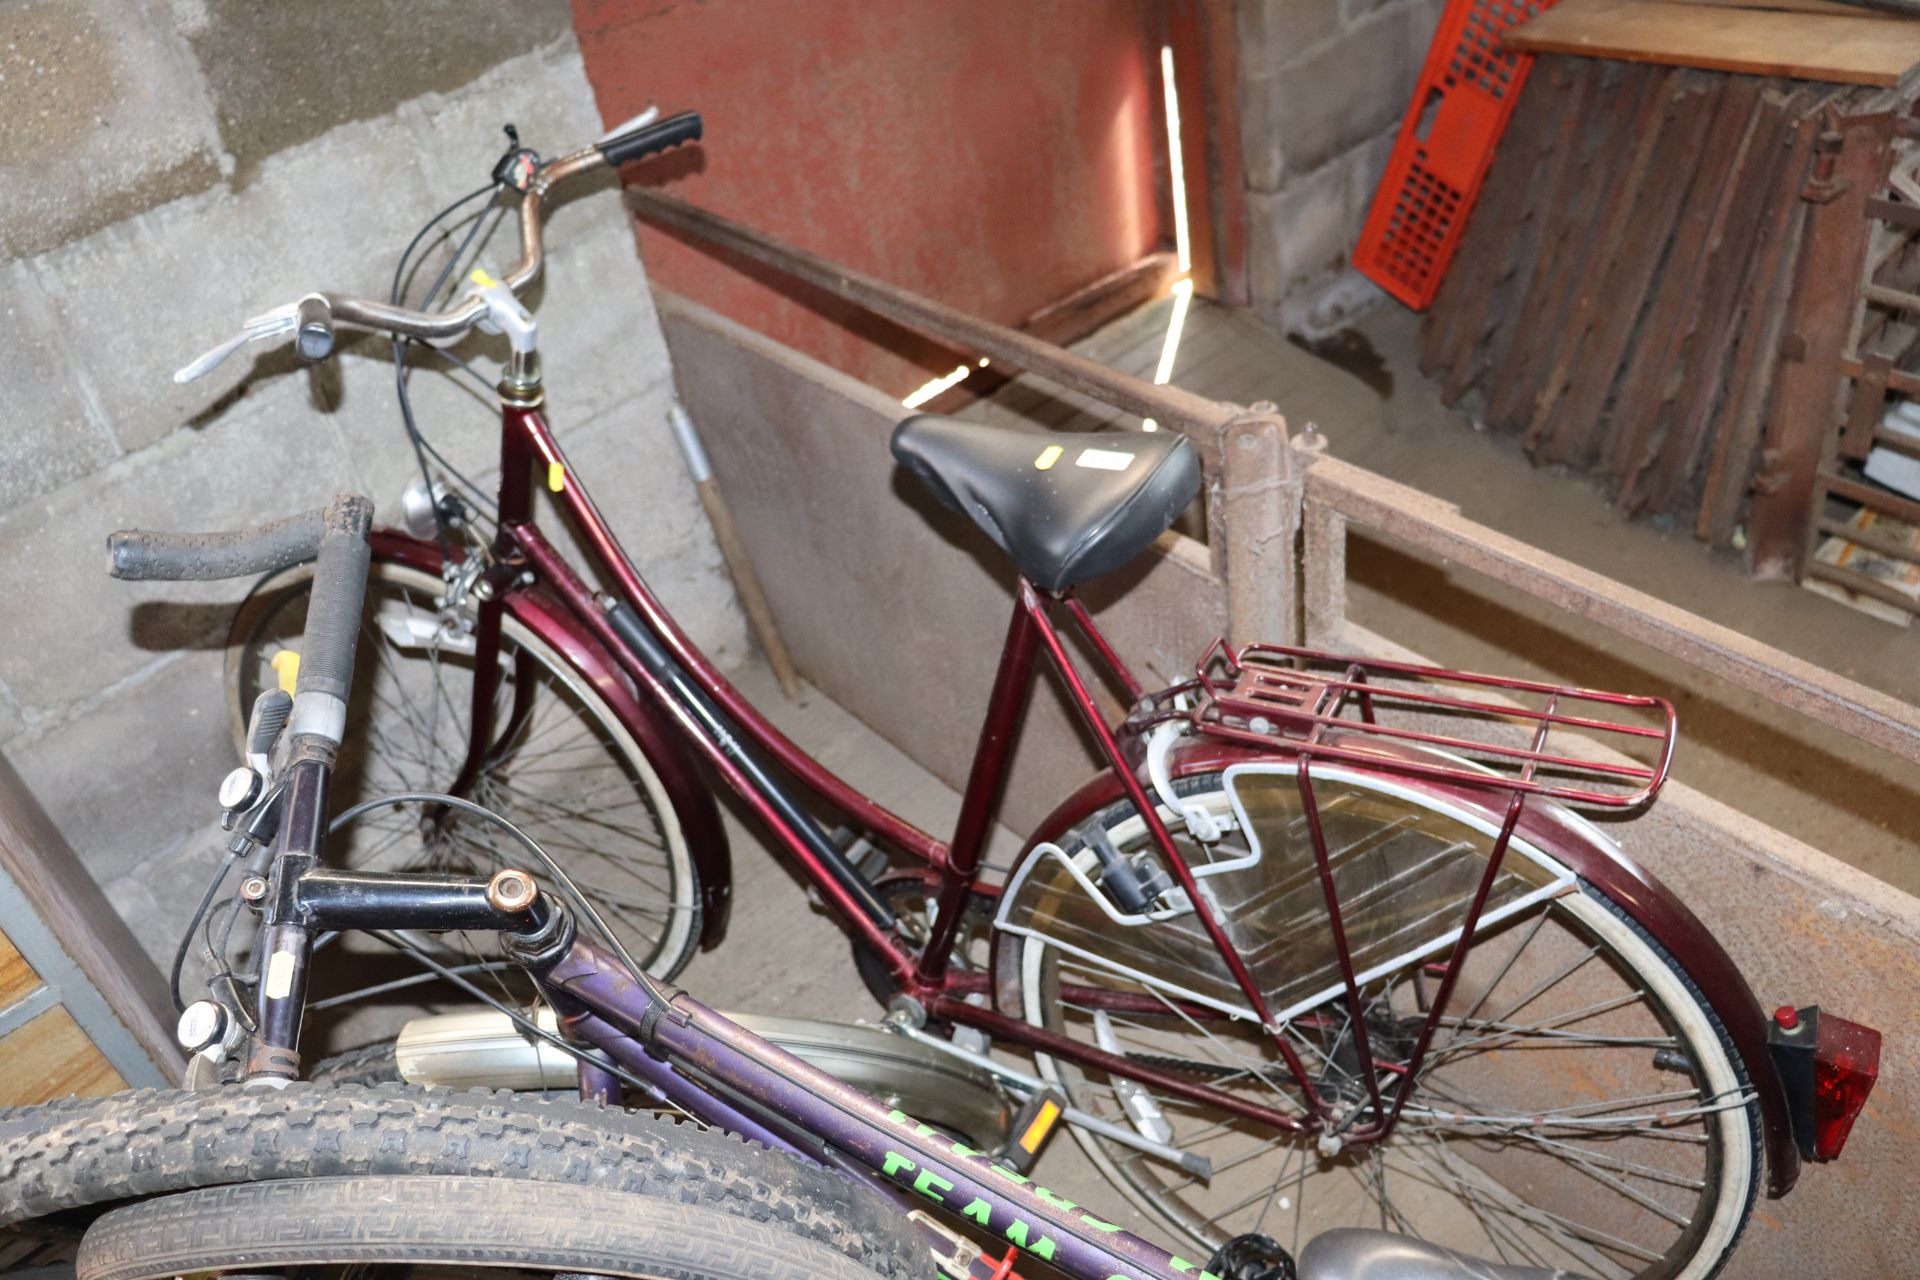 A ladies Raleigh bicycle with three speed gears, m